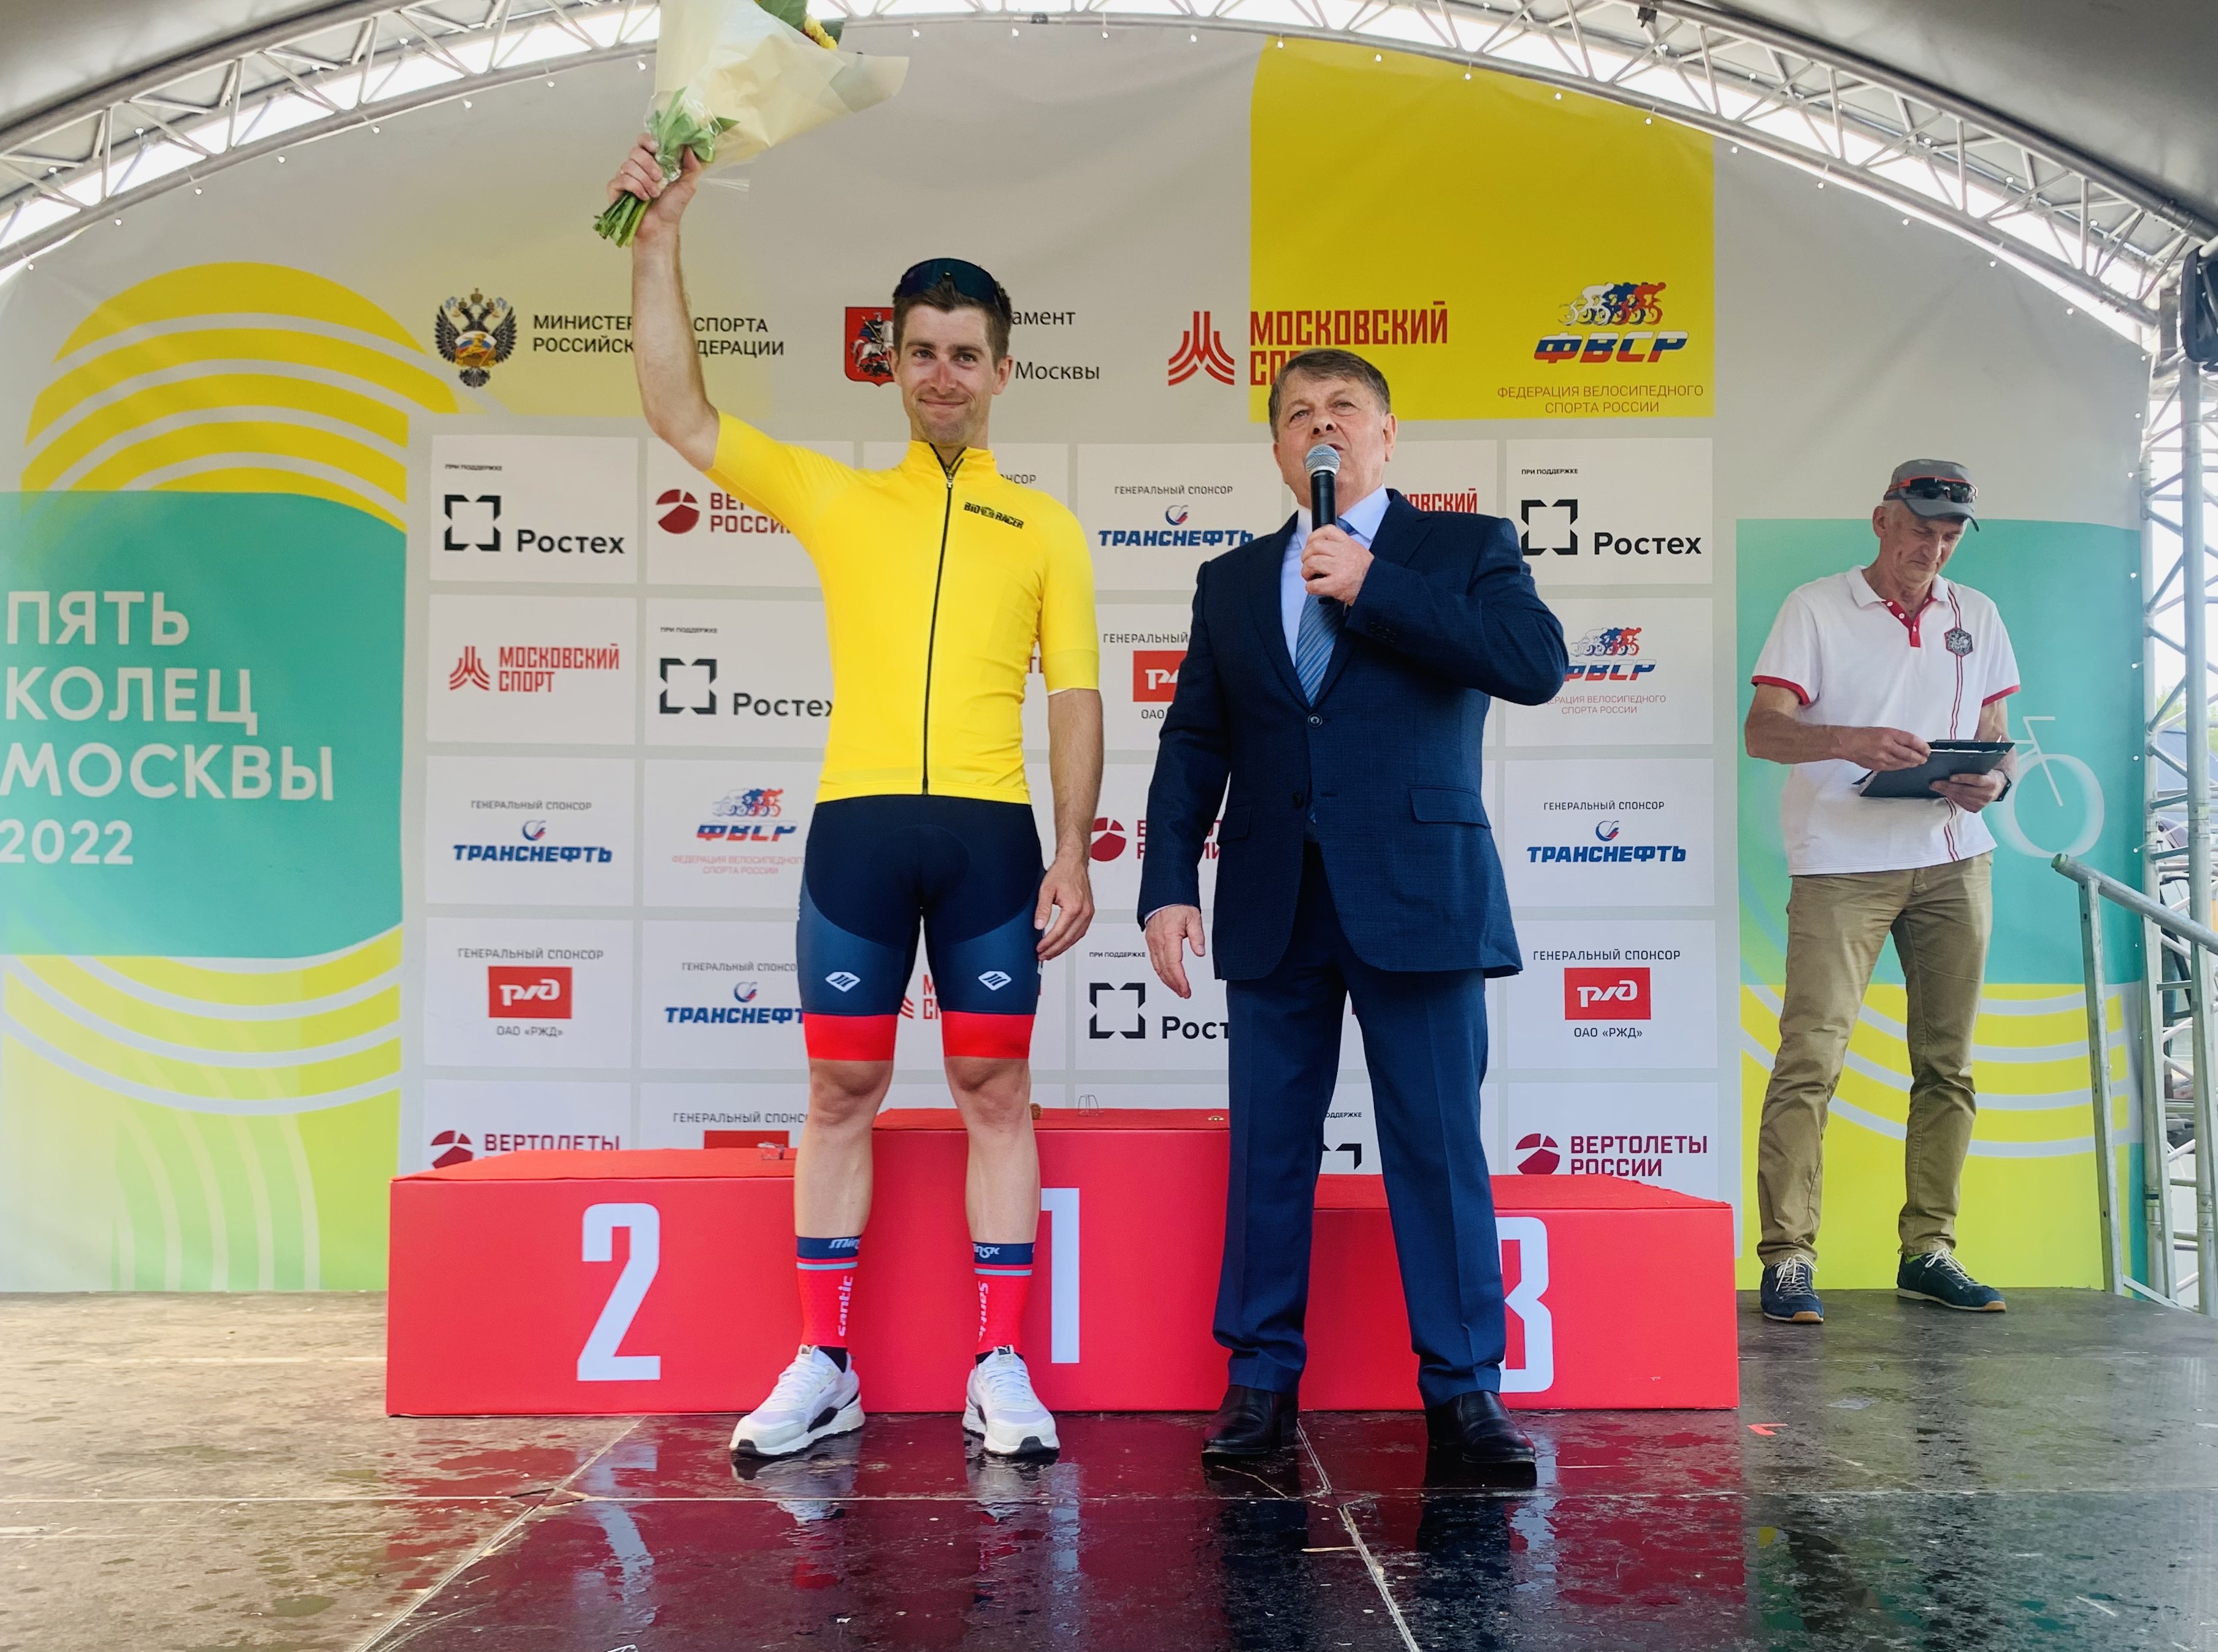 Two victories of Minsk Cycling Club at Five Rings of Moscow